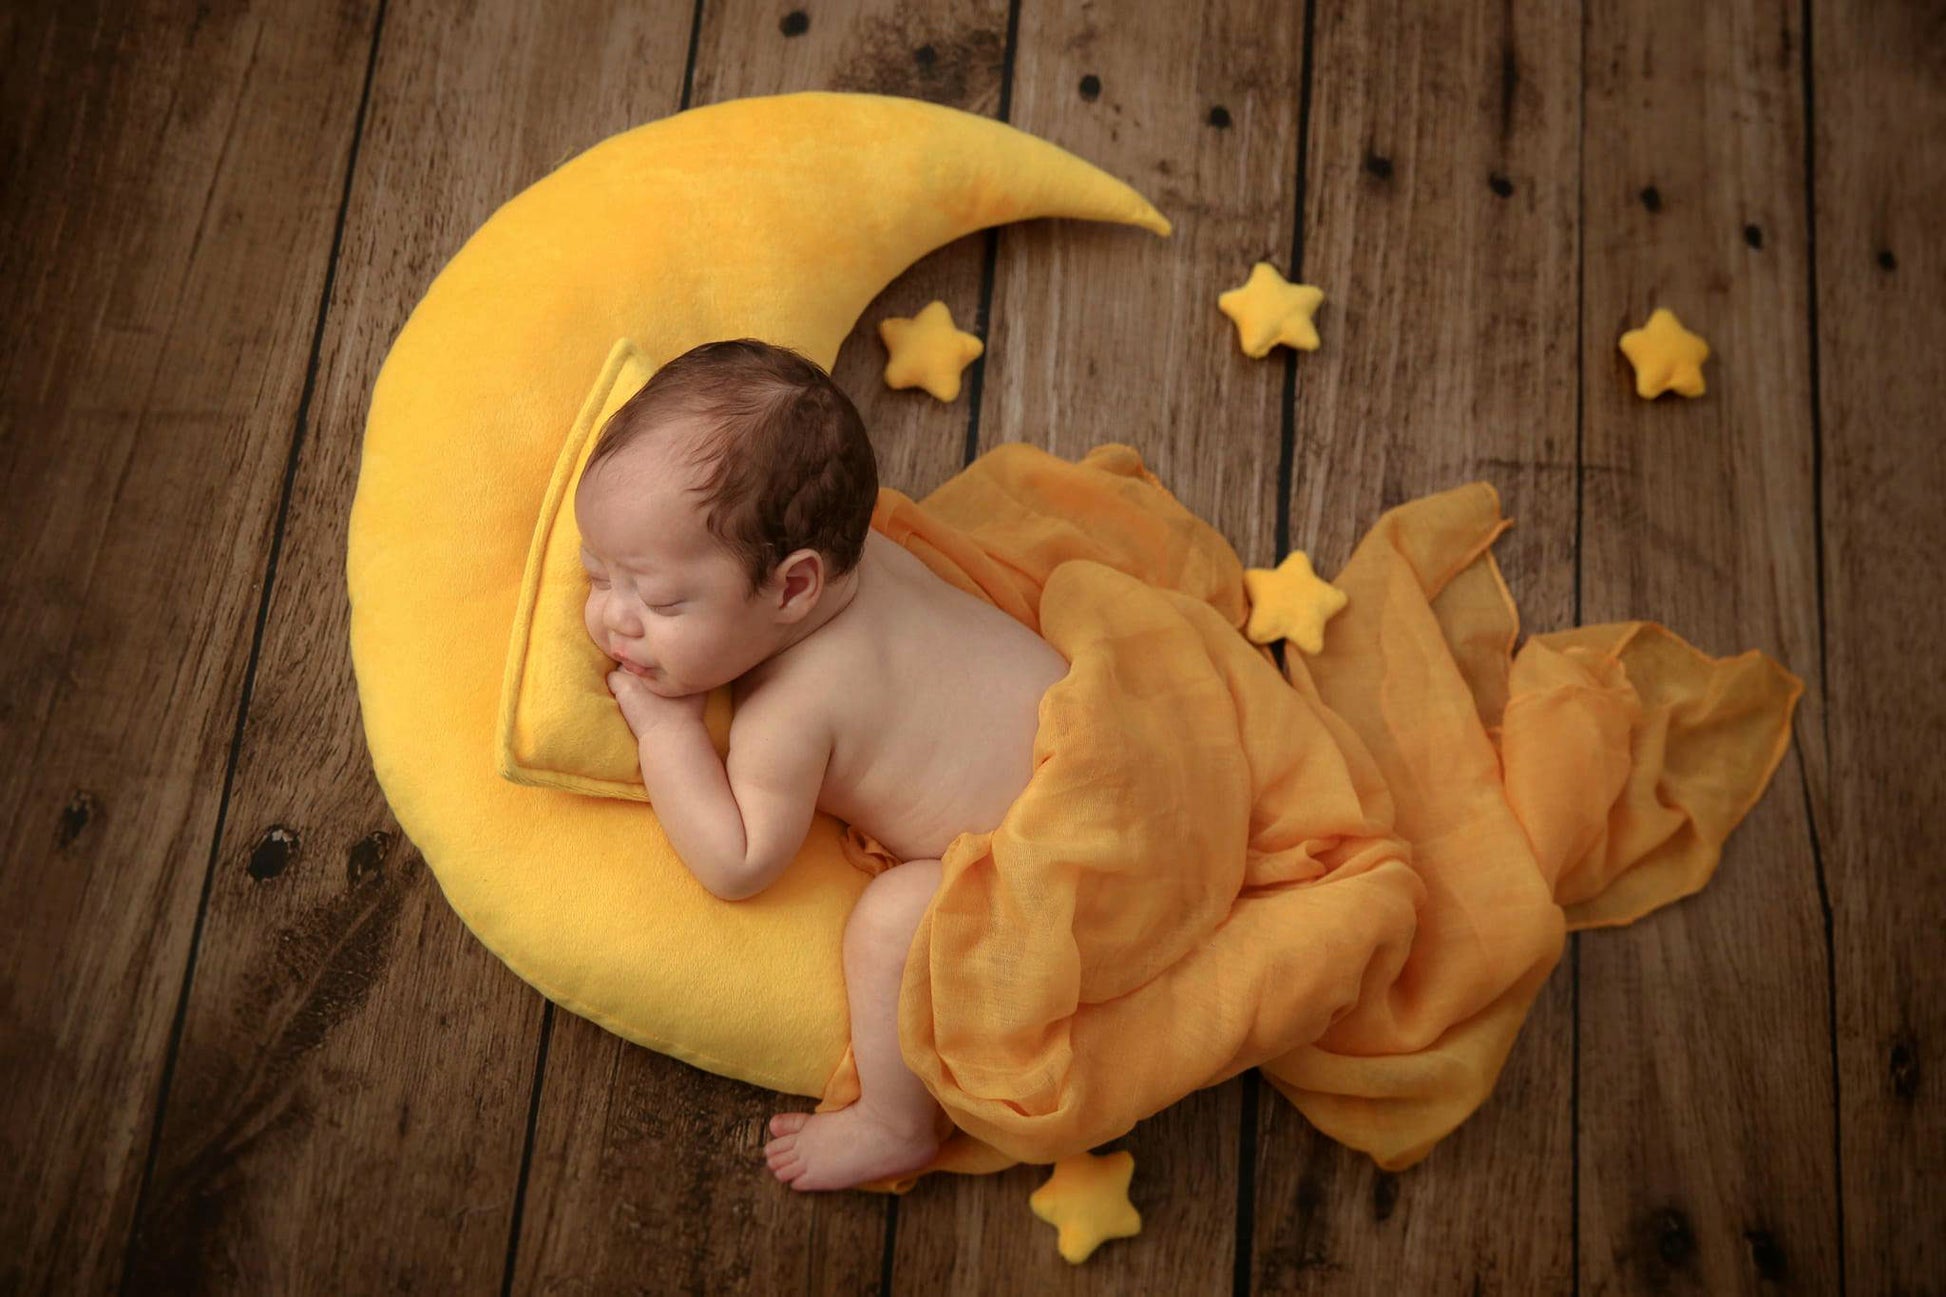 Dazzling, handmade Moon Pillow set for newborn photography. This is a must-have item for every newborn photographer.